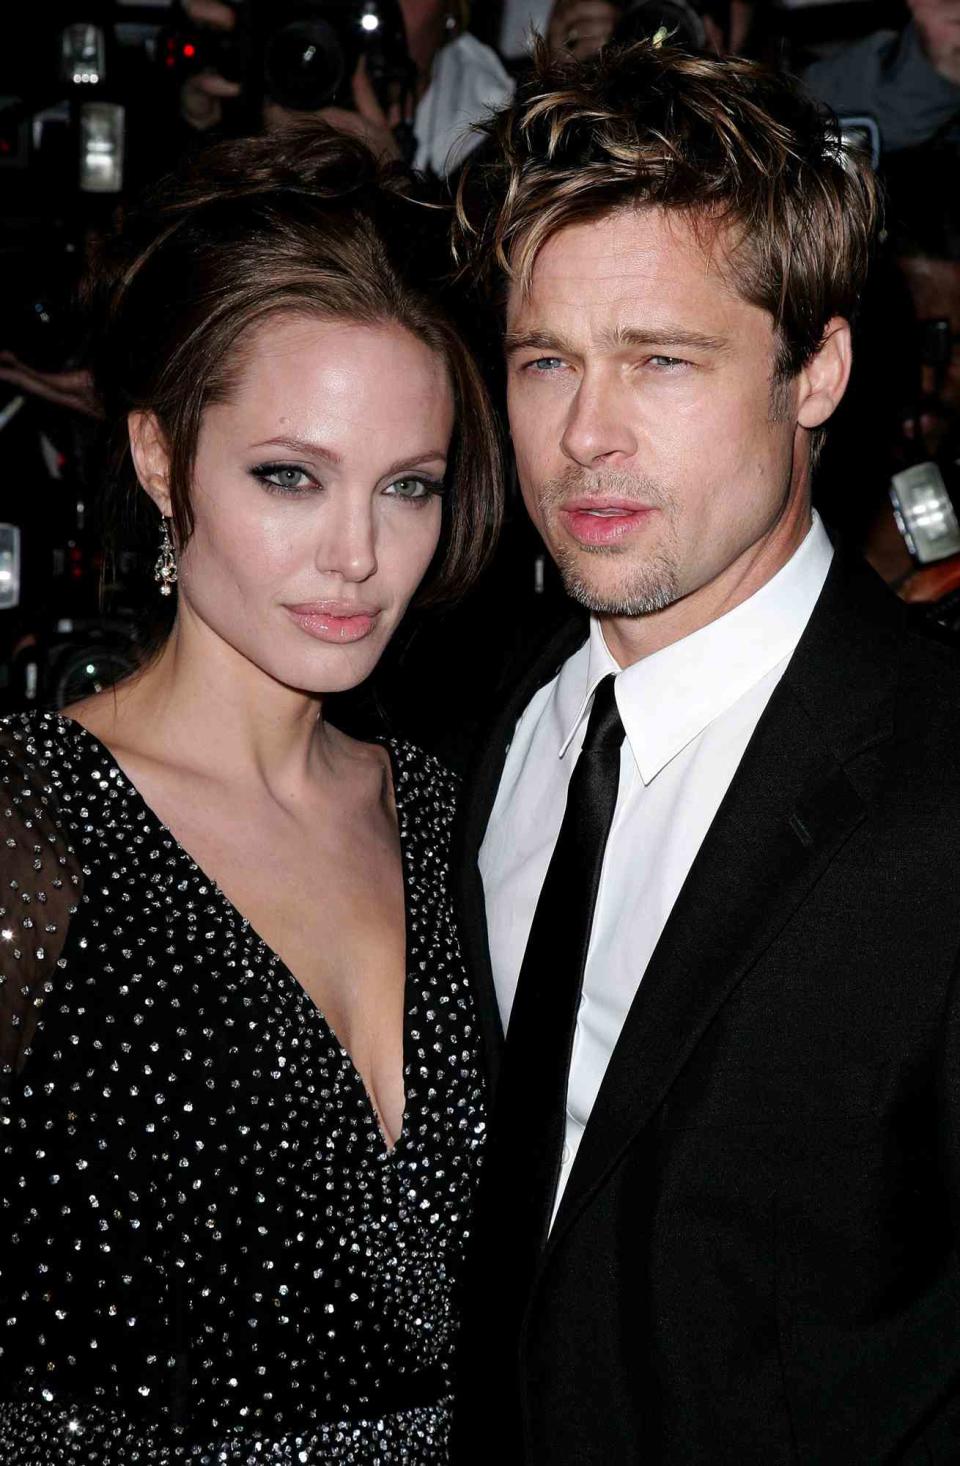 Angelina Jolie and Brad Pitt during "The Good Shepherd" - New York Premiere - Outside Arrivals at Ziegfeld Theater in New York City, New York, United States